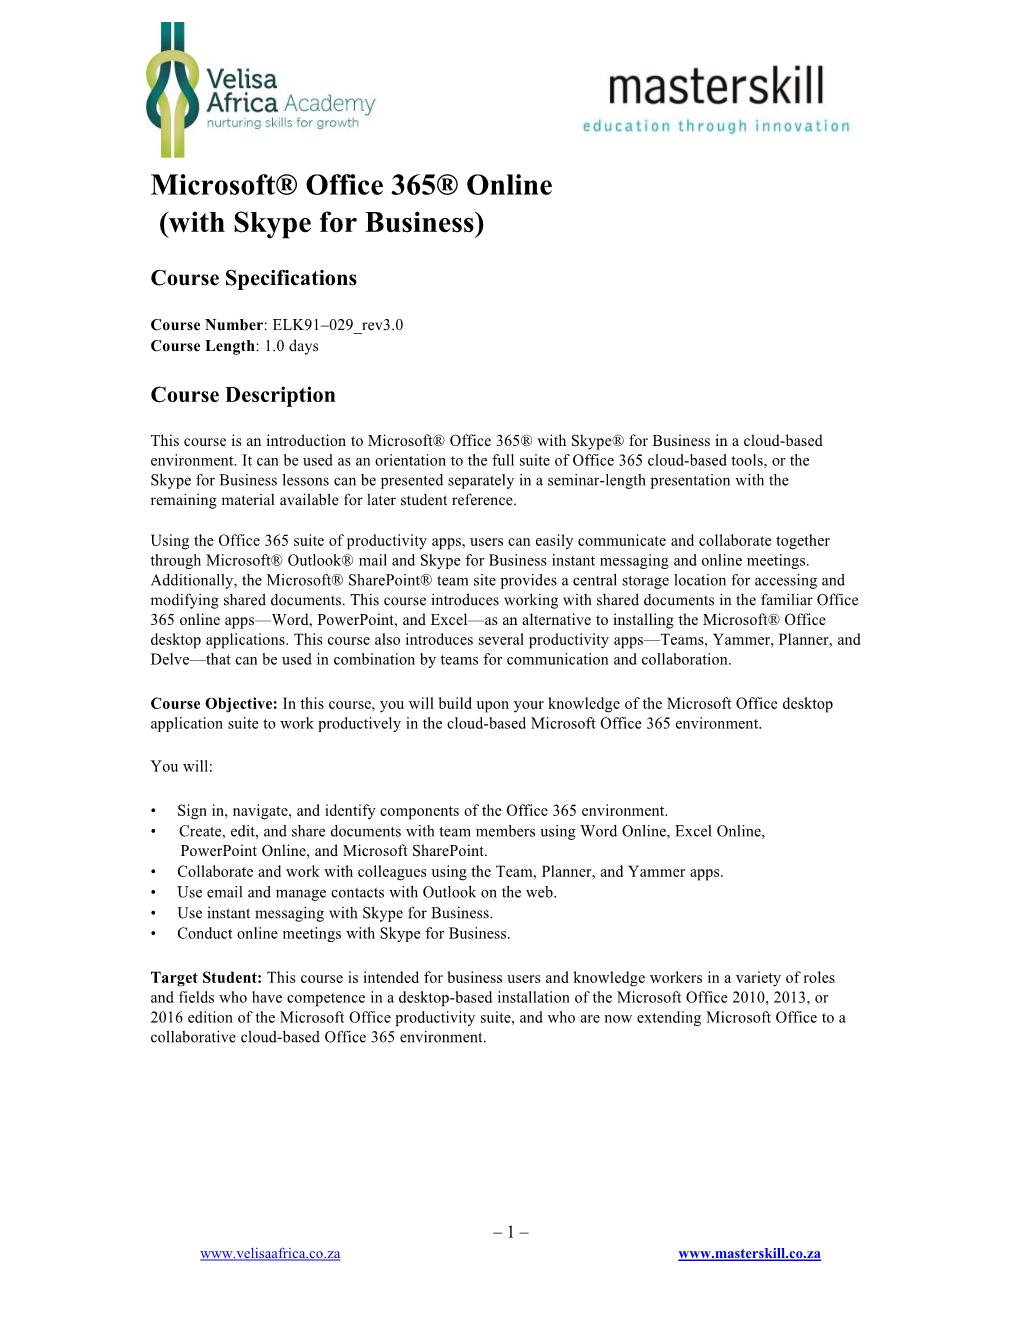 Microsoft® Office 365® Online (With Skype for Business)